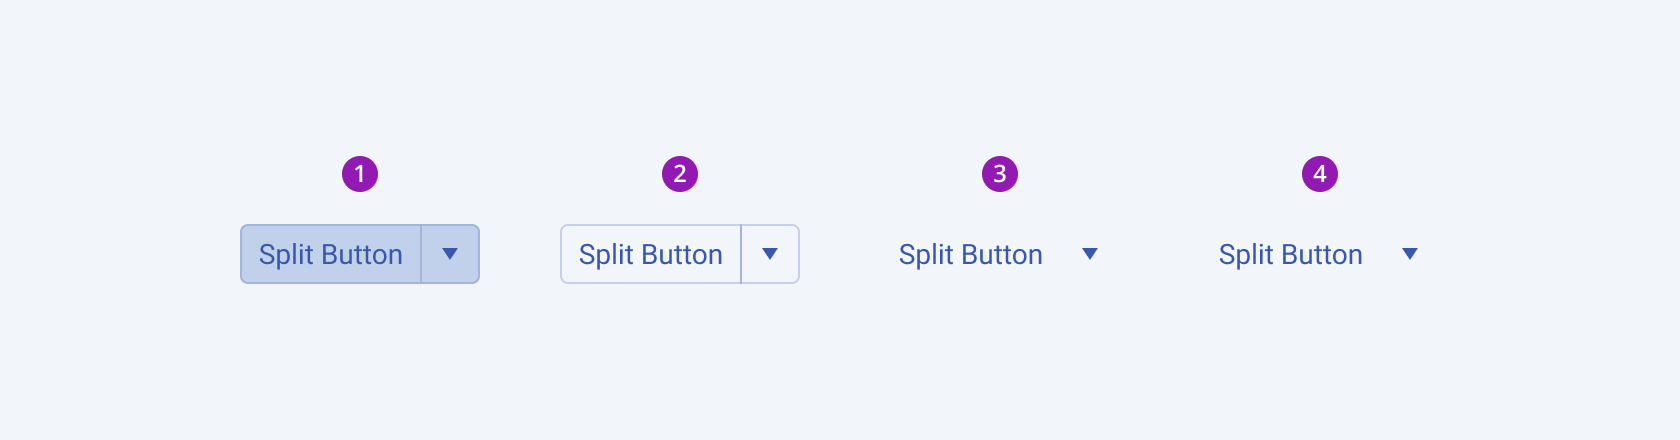 Four Telerik and Kendo UI SplitButton components demonstrating the default solid, outline, flat, and link fill modes respectively.